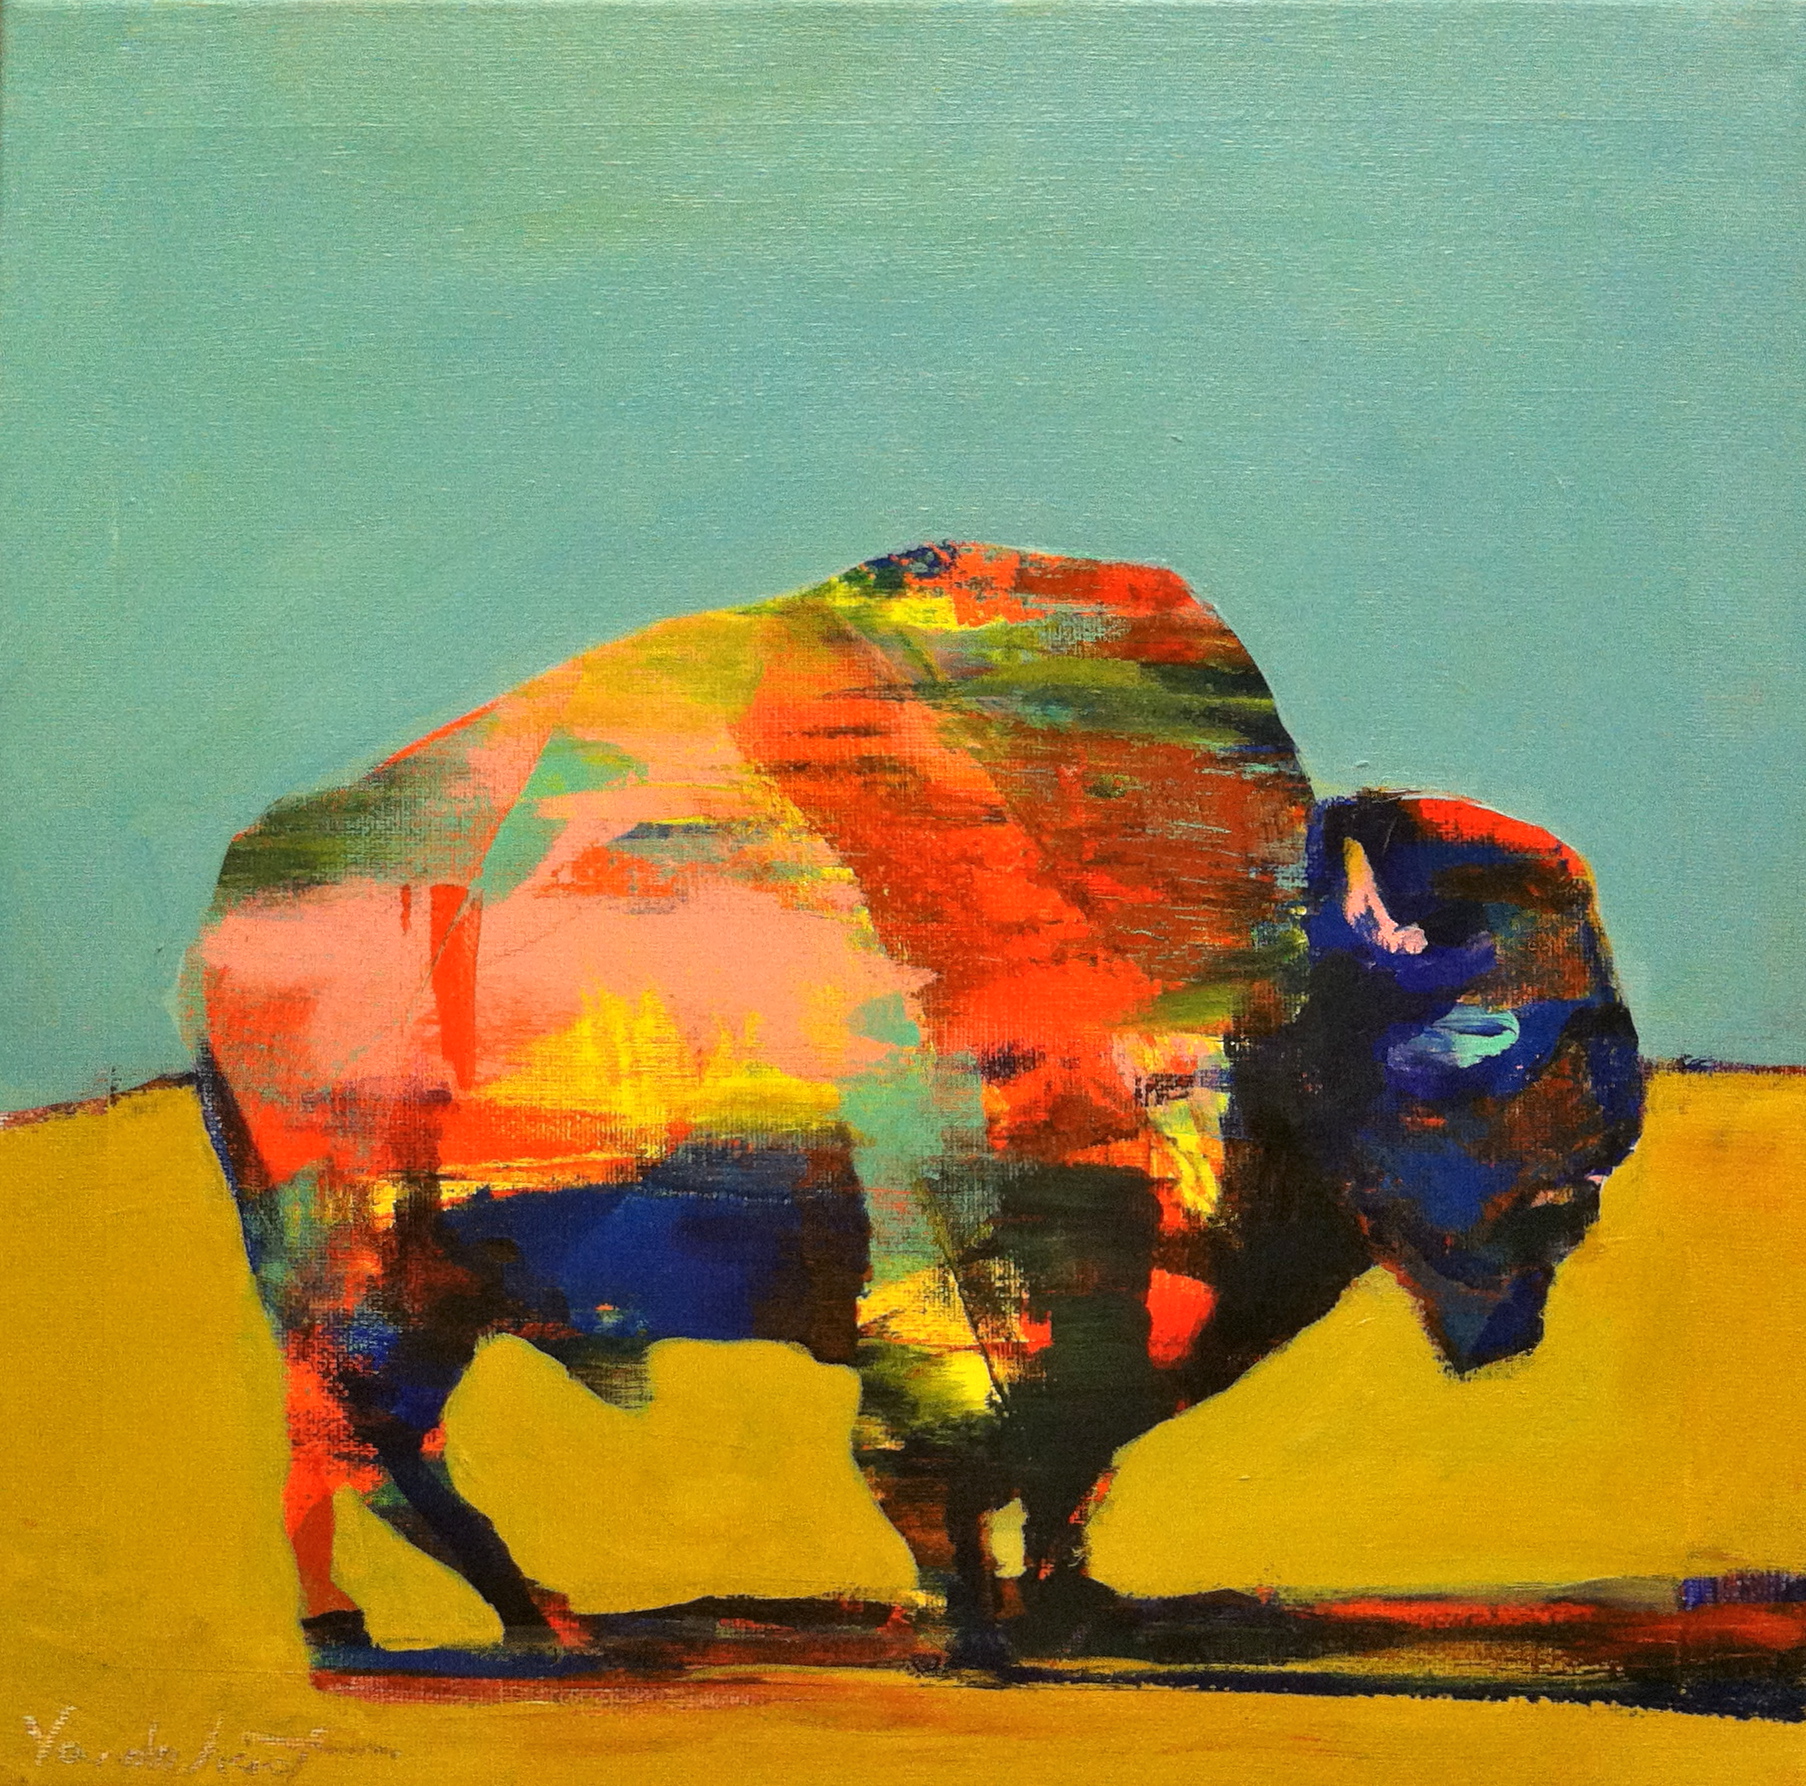  Bison #1, acrylic on canvas, 12x12 inches, 2015 